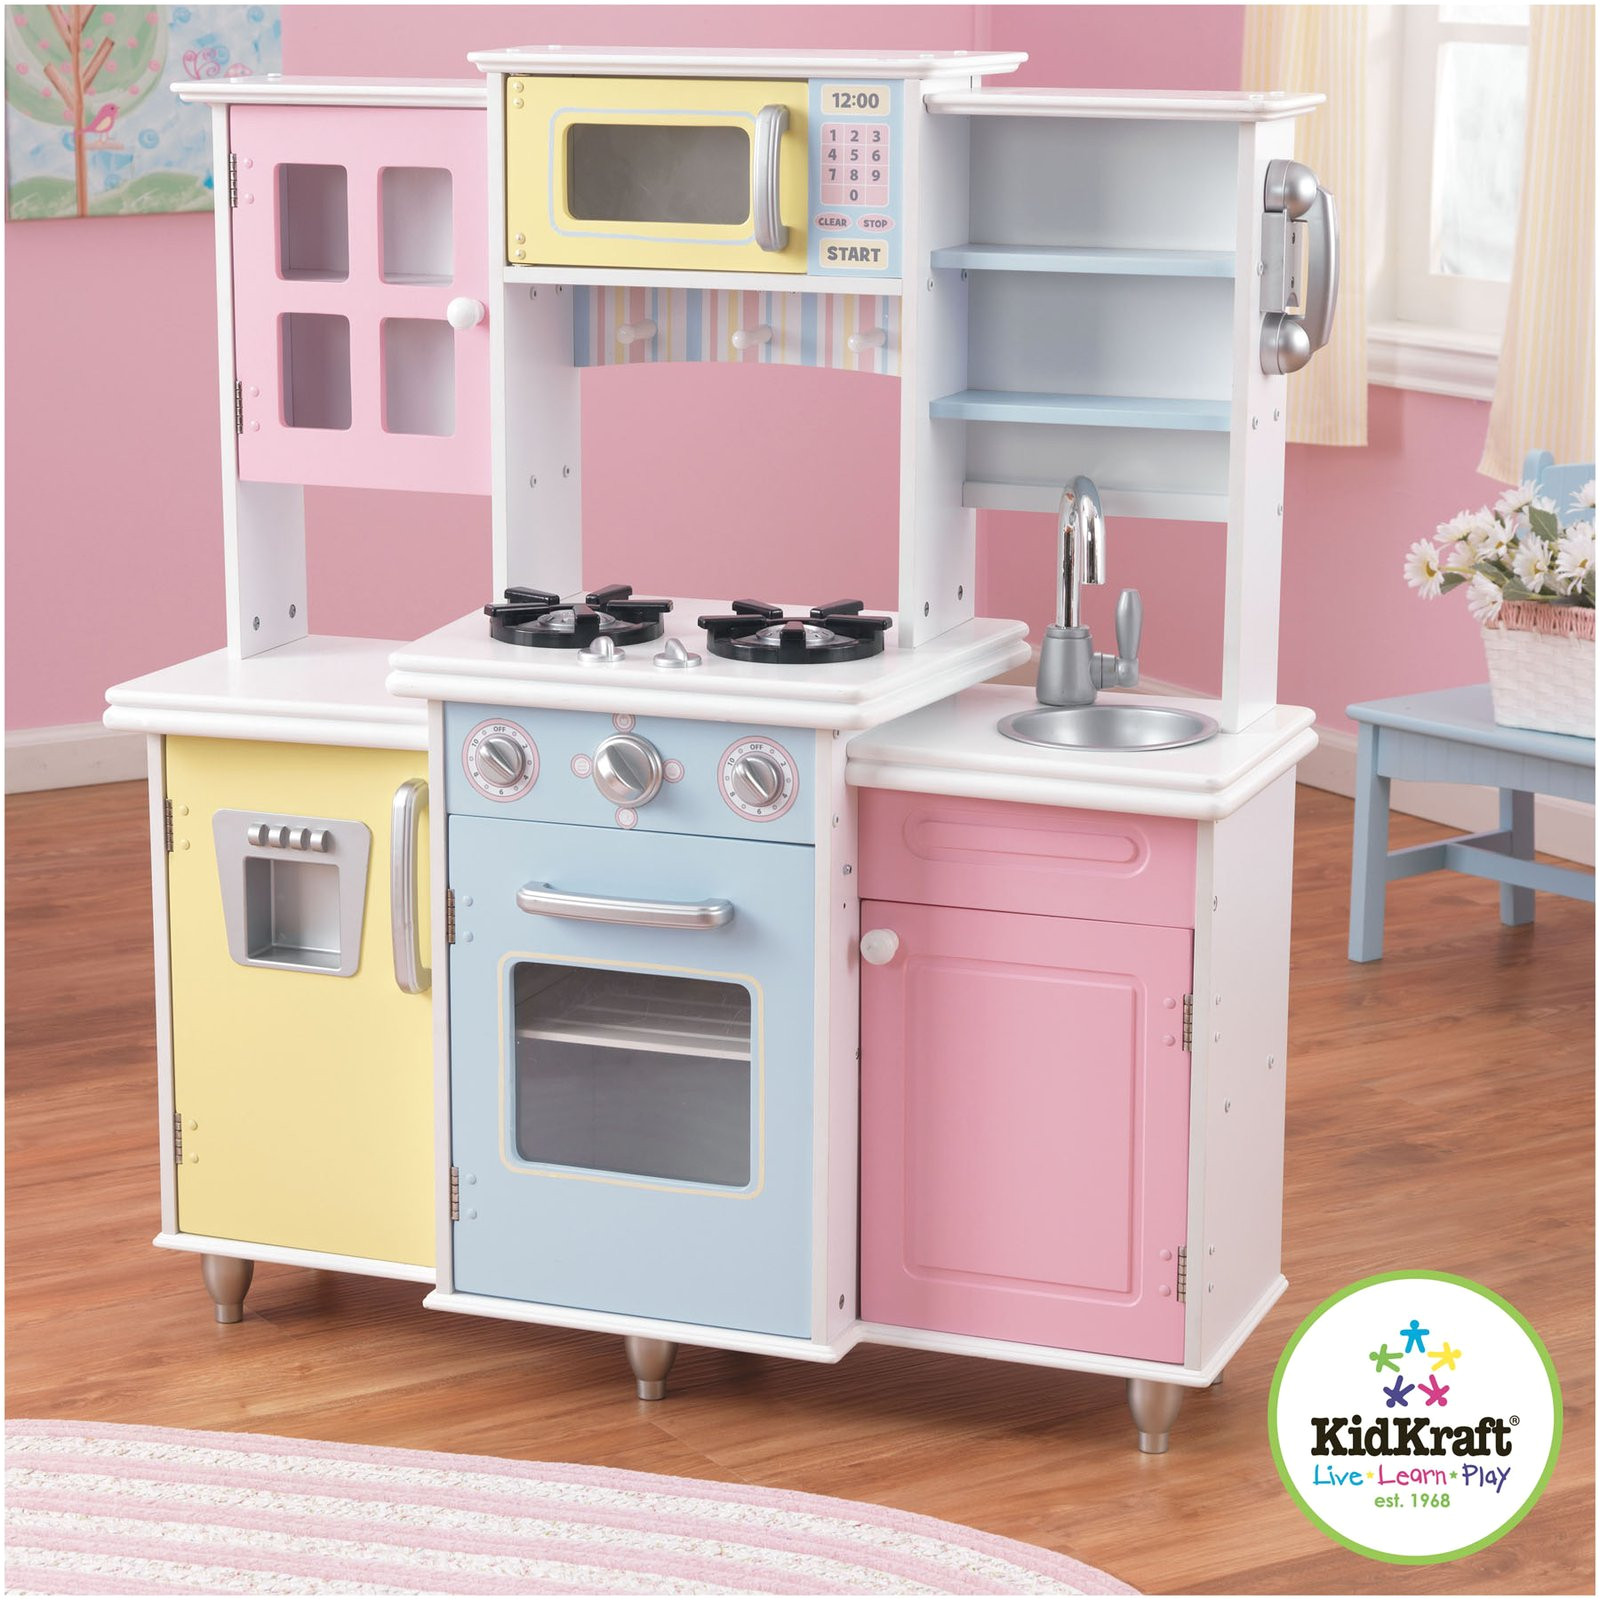 fascinating imaginarium all in one wooden kitchen set in tips get creative your child with wooden kitchen playsets